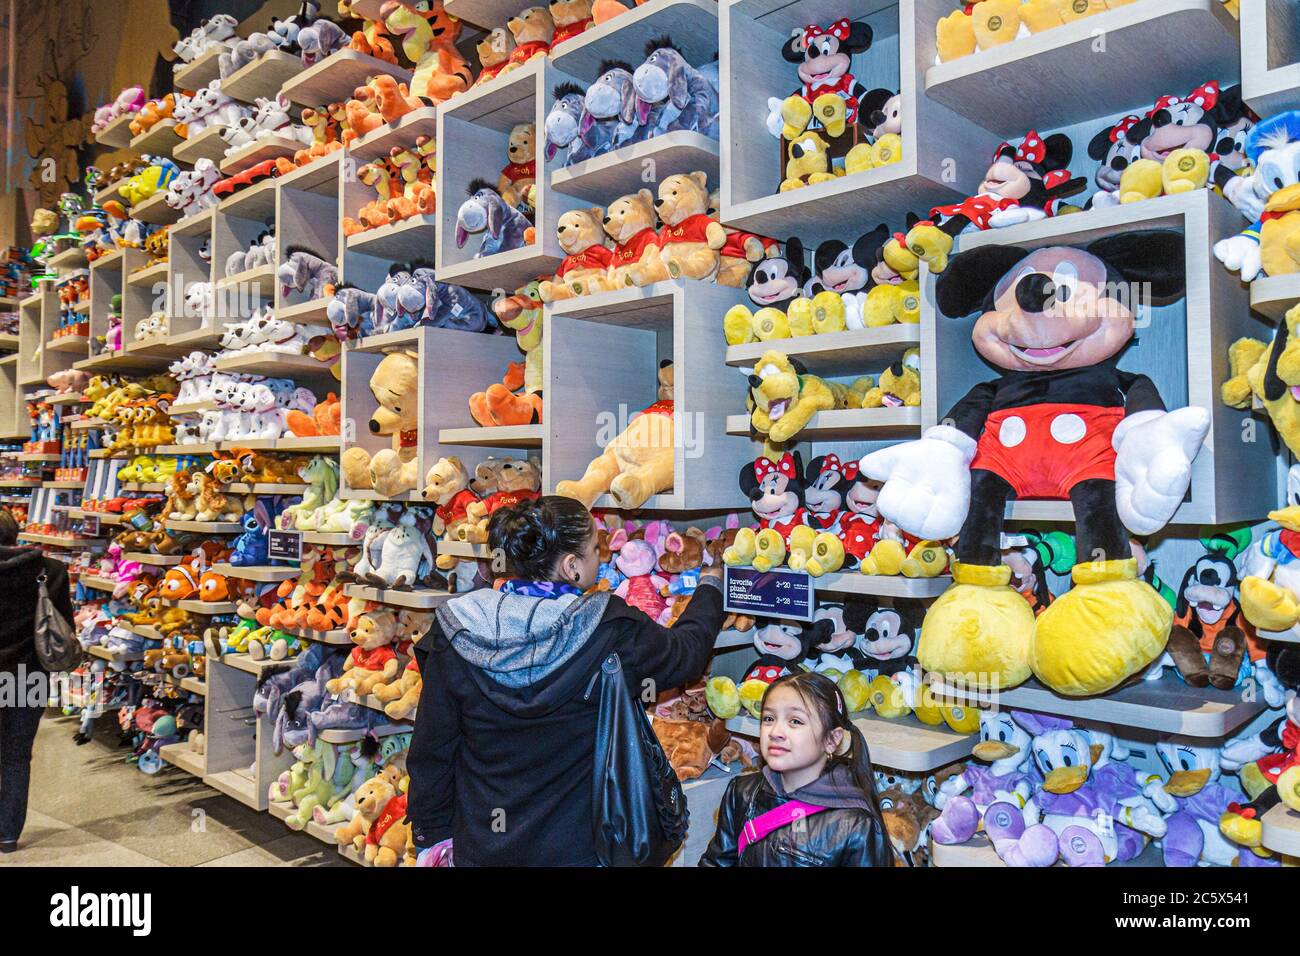 New York City,Manhattan,Times Square Disney Store,movie characters display sale stuffed dolls toys,Hispanic girl mother parent daughter Mickey Mouse Stock Photo